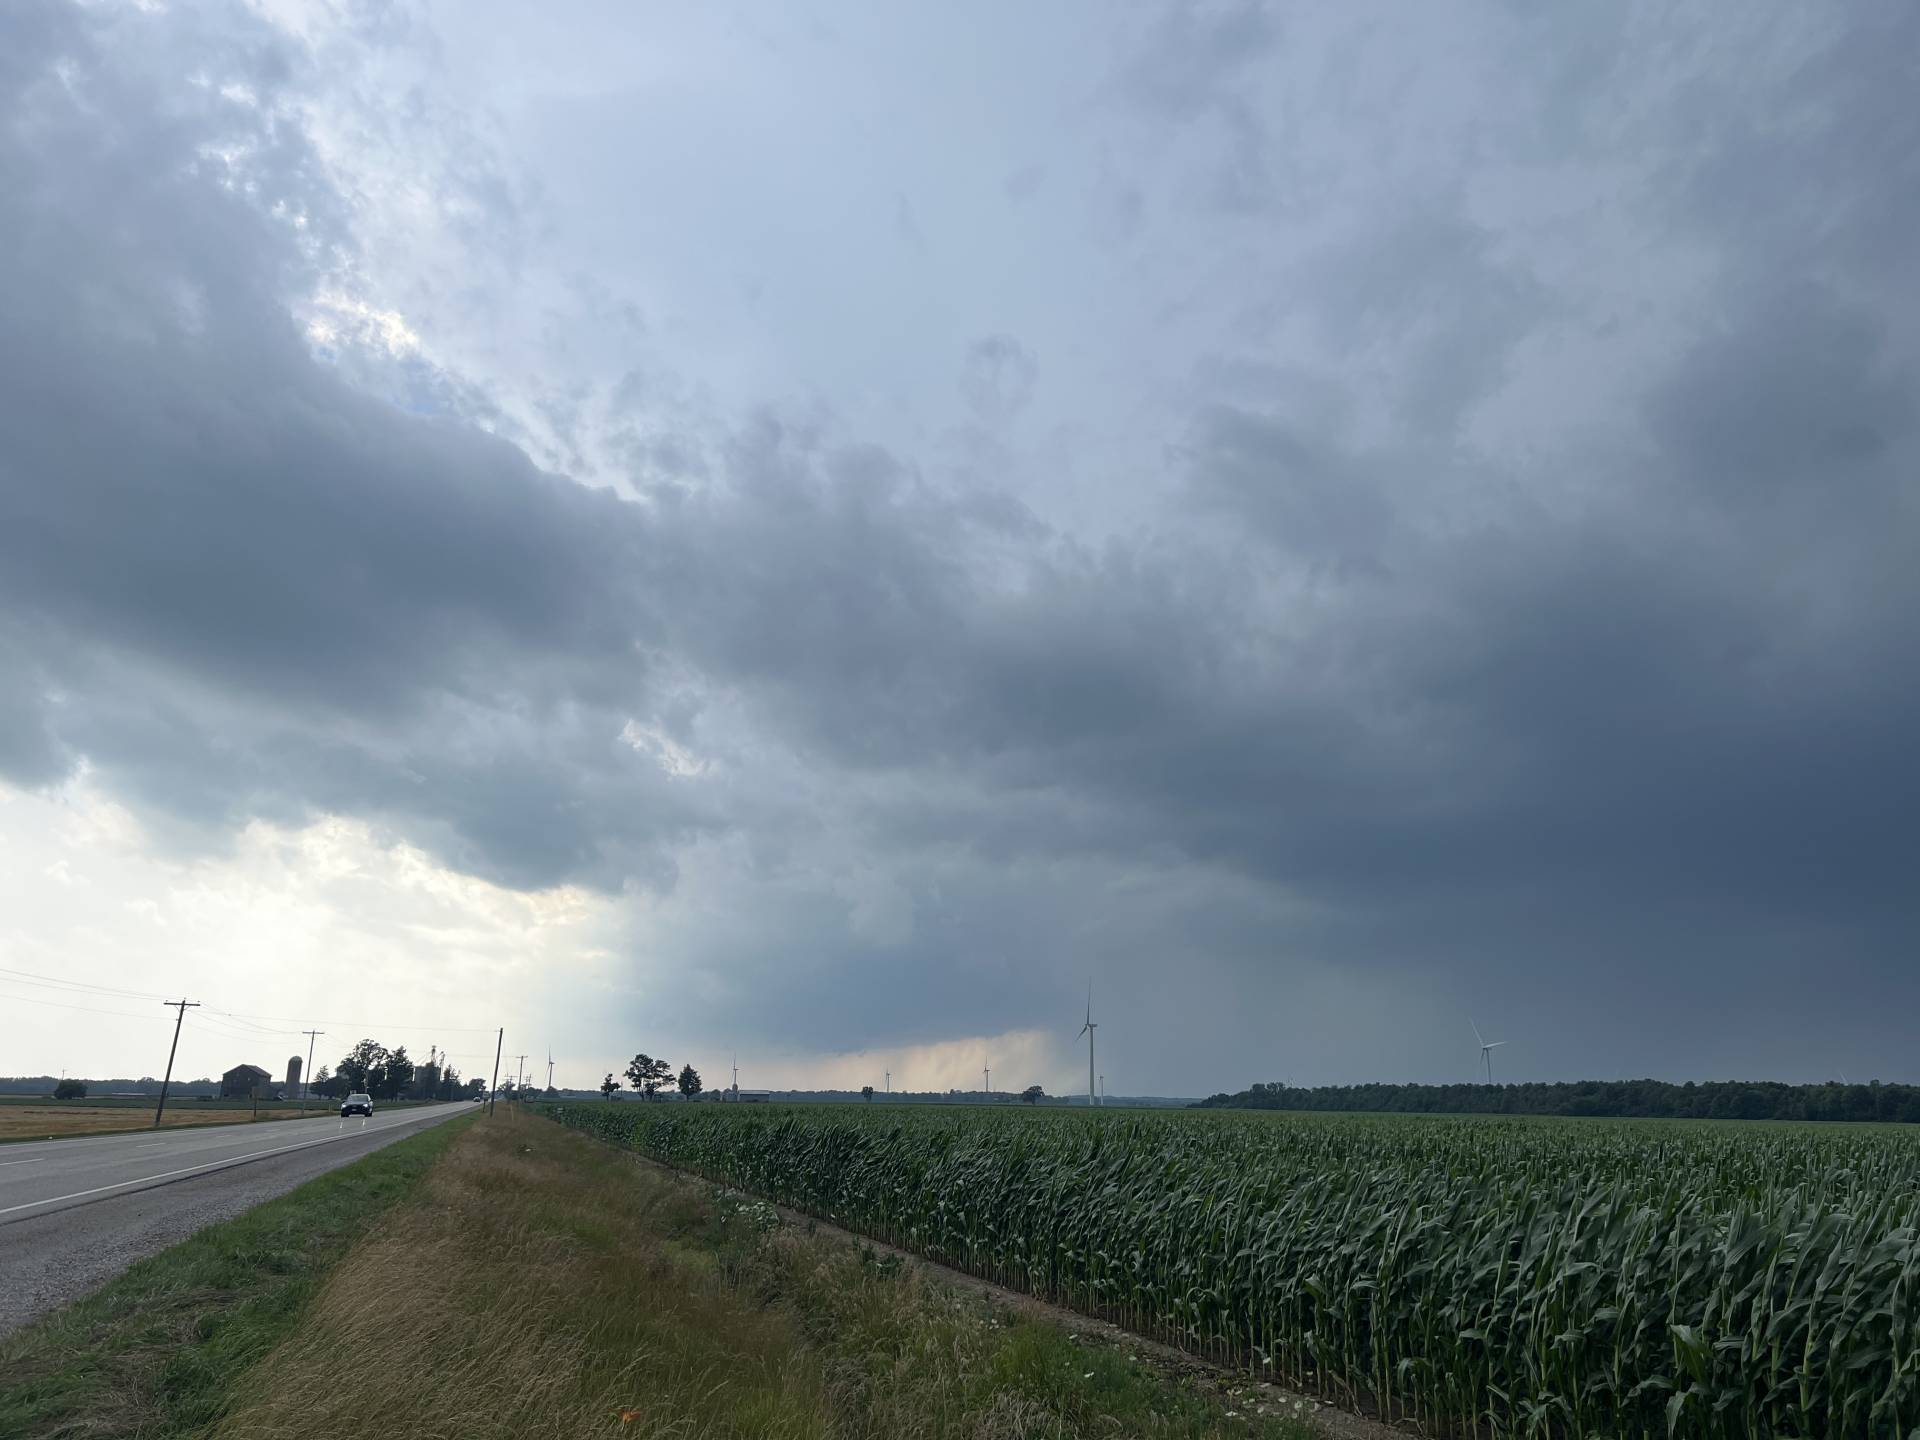 South Huron, ON 04:51 PM #ONstorm